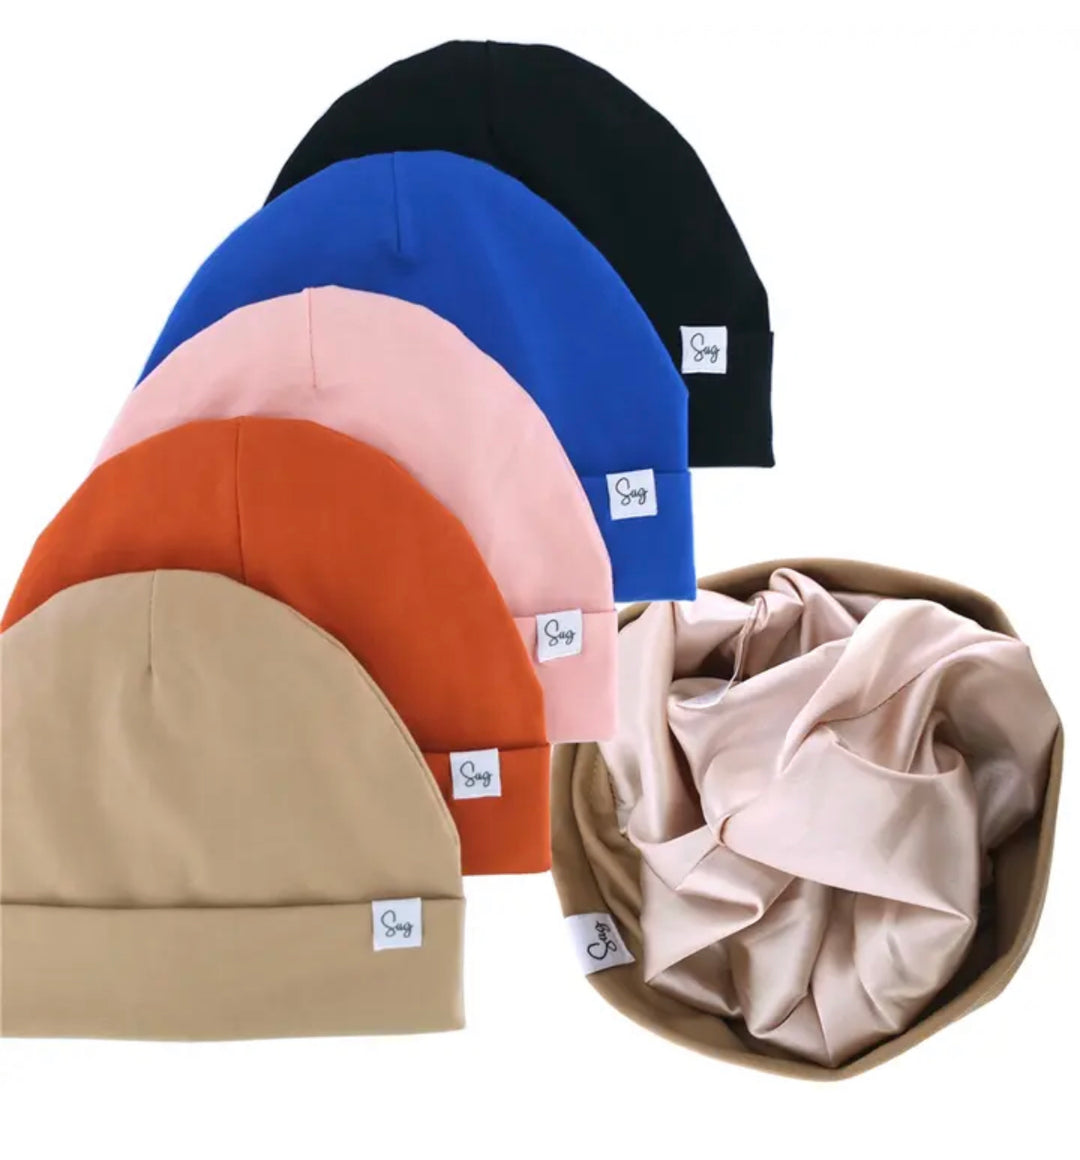 Satin lined hats